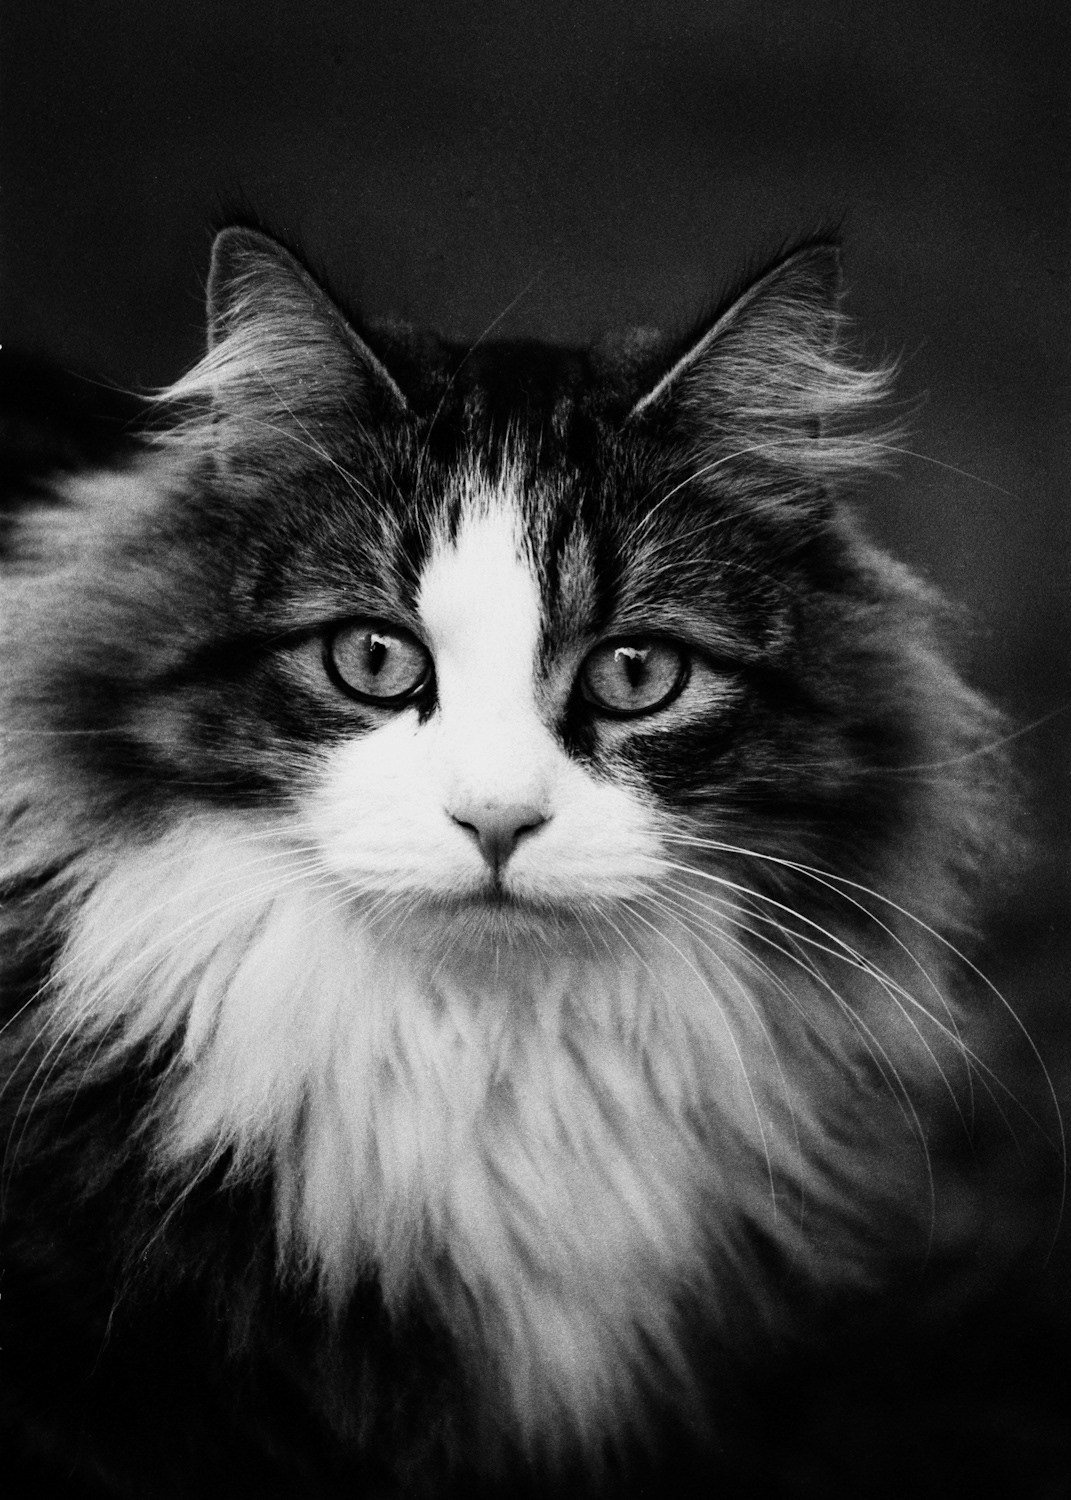 ILFORD neopan kodak portra darkroom analog Analogue traditional 35mm 135mm black and white color Cat kitty portrait